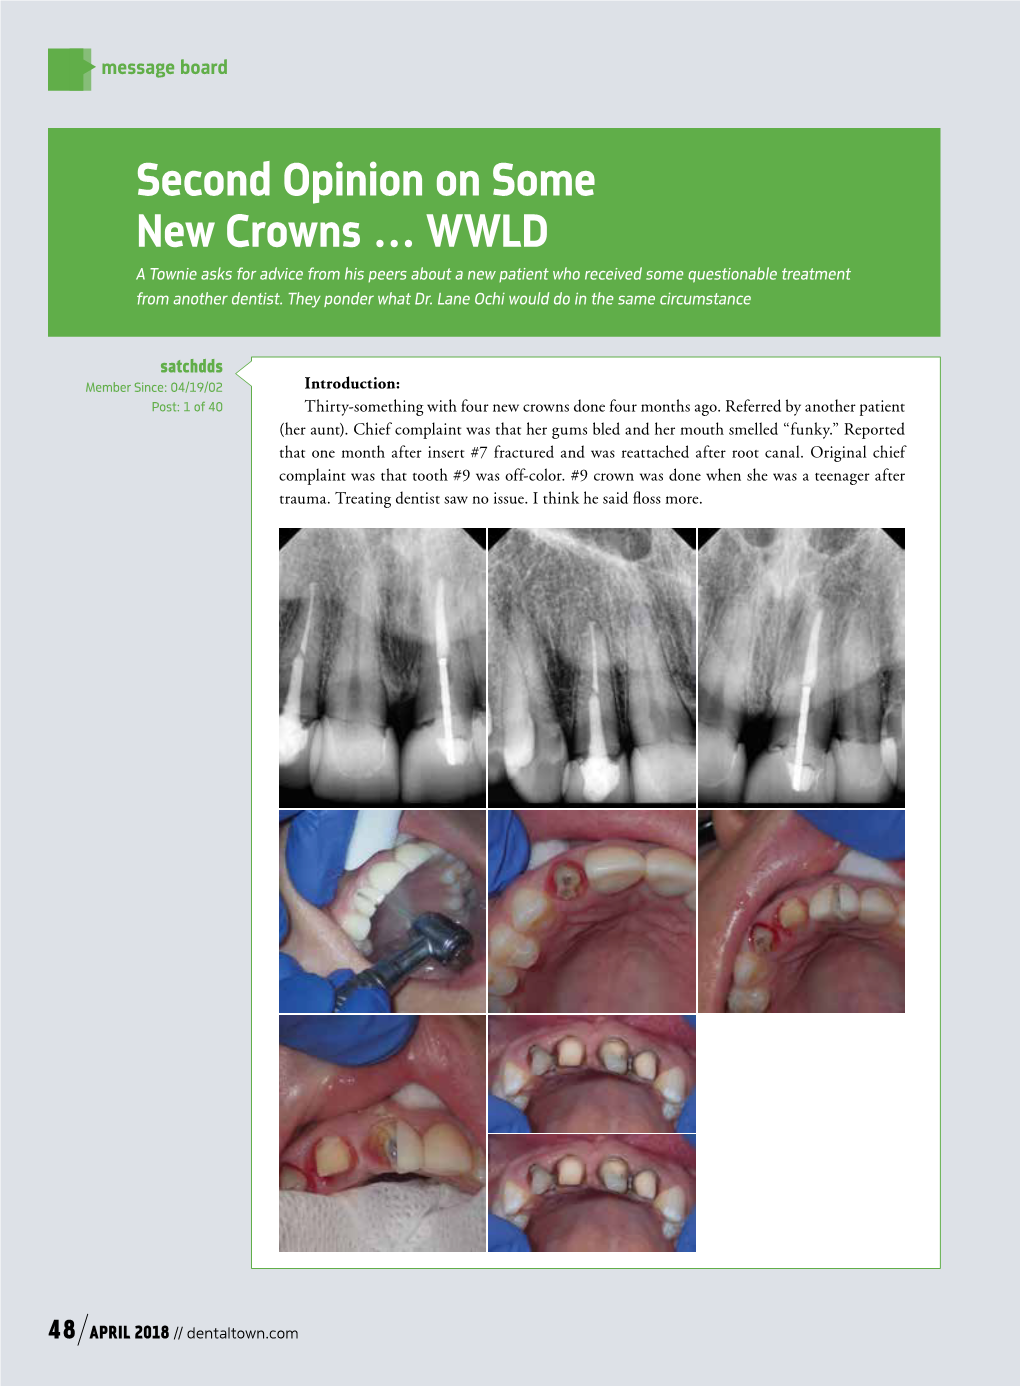 Second Opinion on Some New Crowns … WWLD a Townie Asks for Advice from His Peers About a New Patient Who Received Some Questionable Treatment from Another Dentist